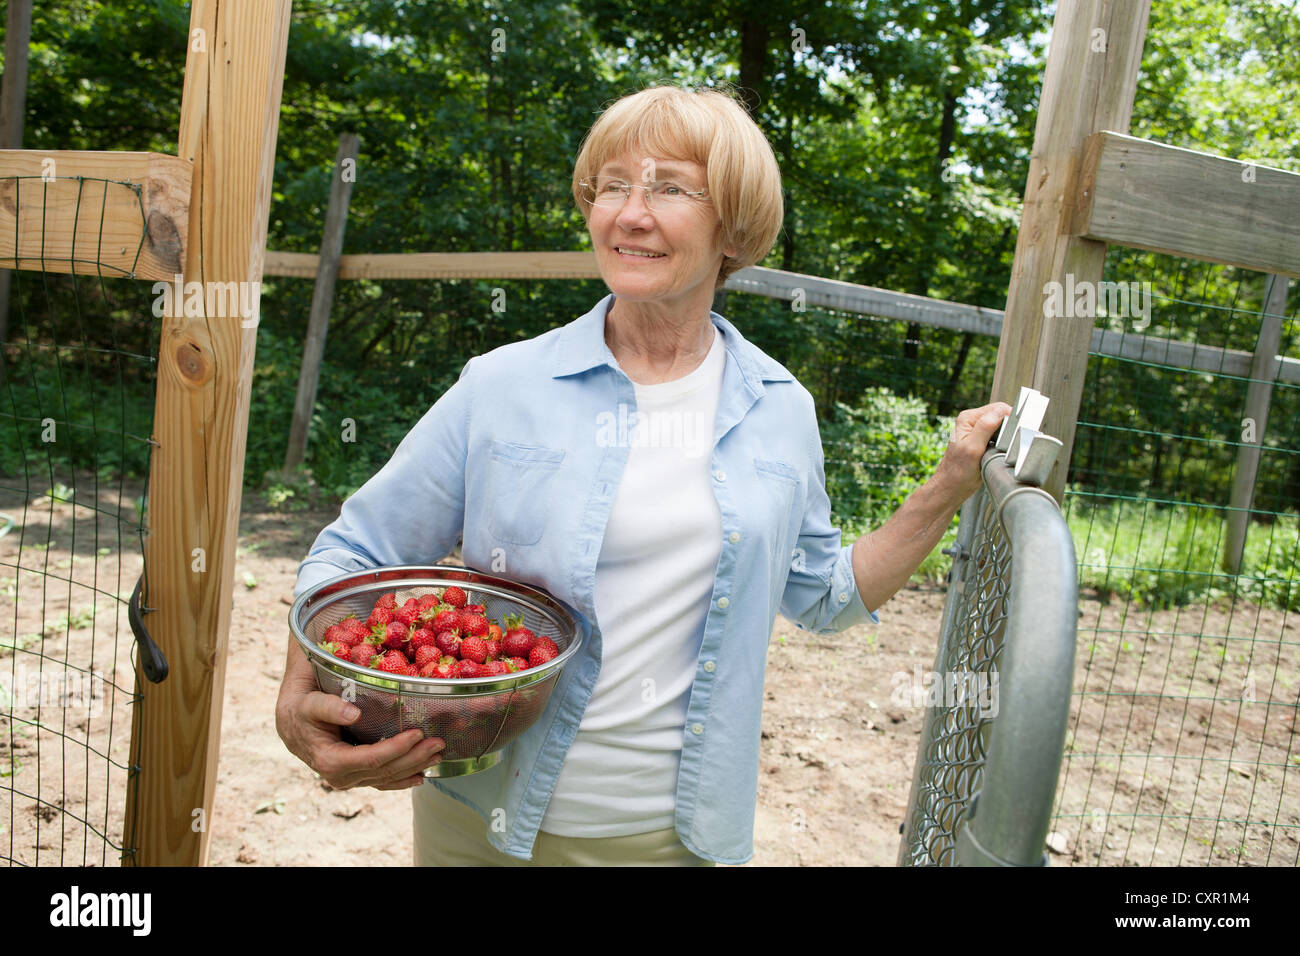 Woman holding colander with strawberries Stock Photo